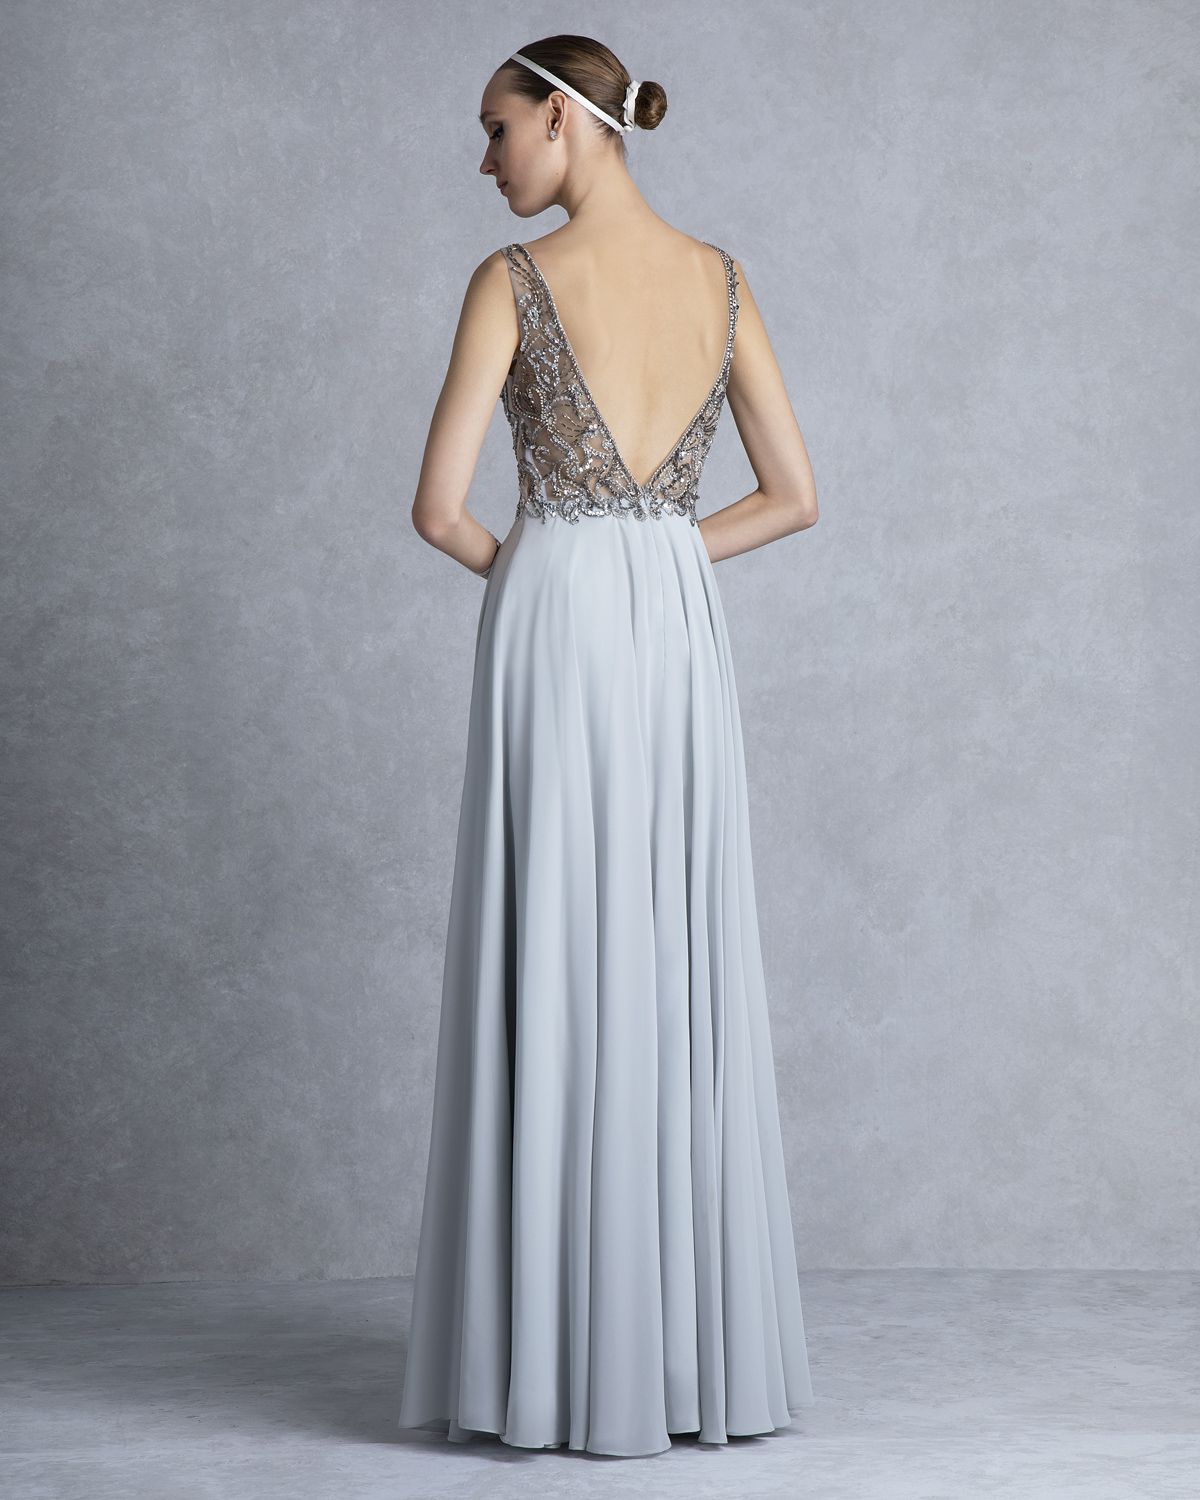 Evening Dresses / Long evening dress with beaded top and chifon skirt